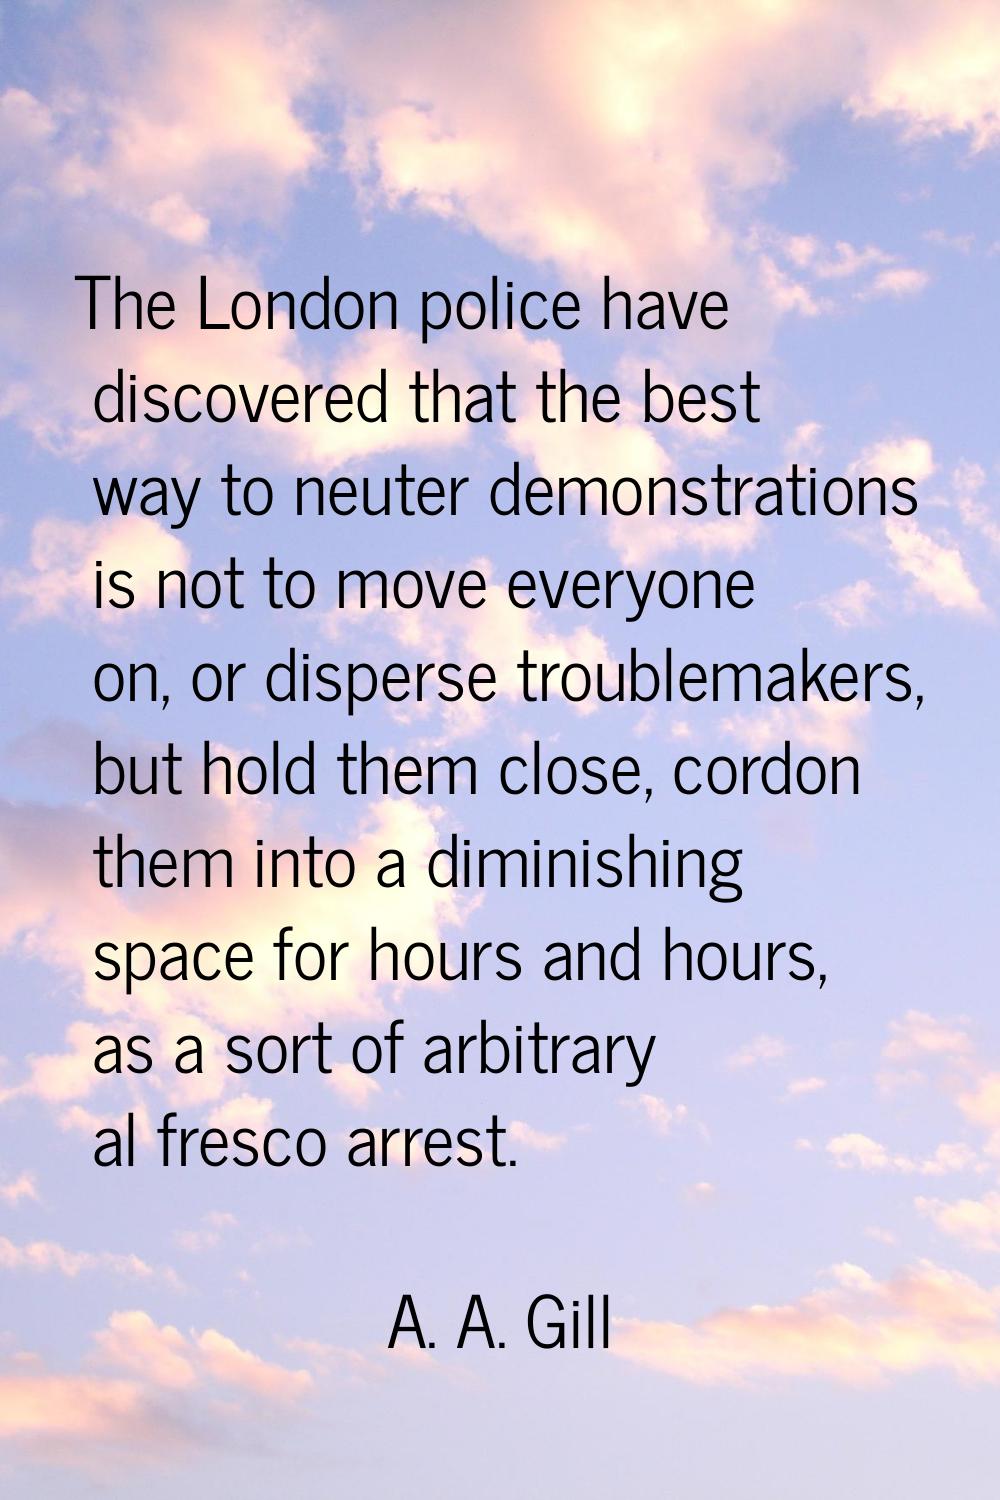 The London police have discovered that the best way to neuter demonstrations is not to move everyon